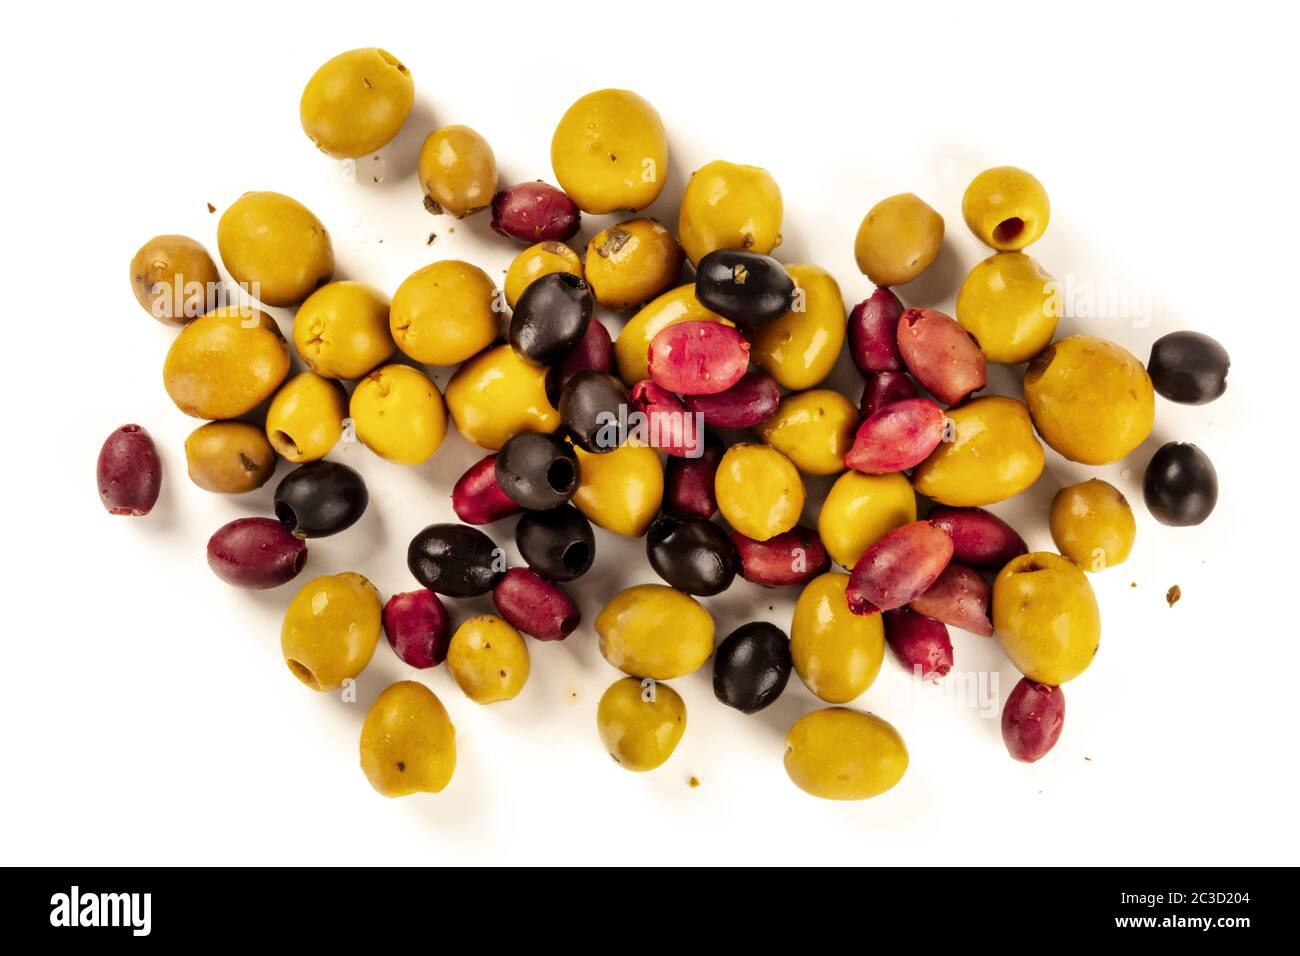 Olives, green, black and brown, shot from above on a white background Stock Photo